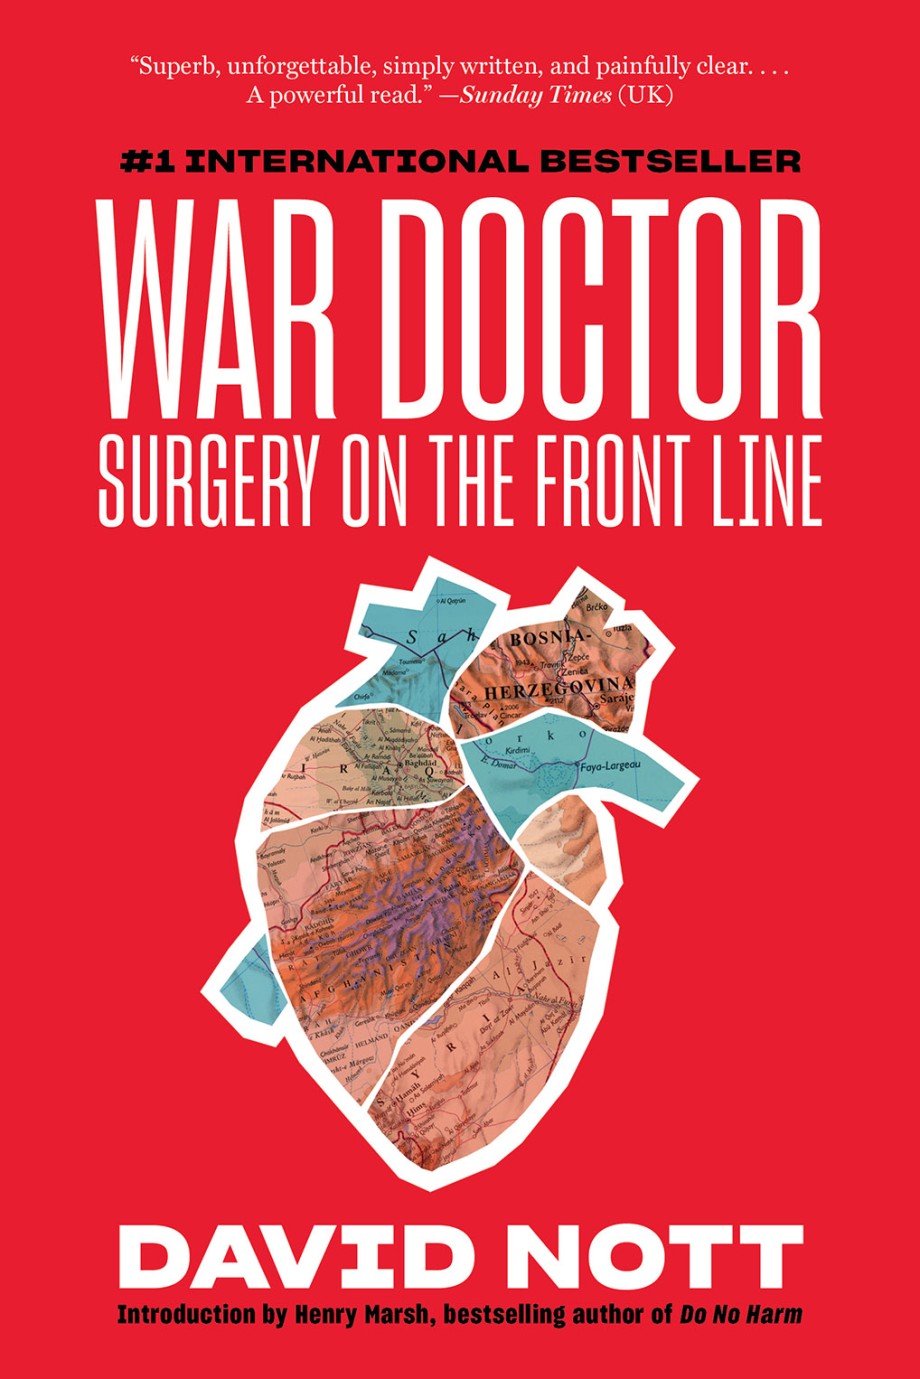 War Doctor Surgery on the Front Line